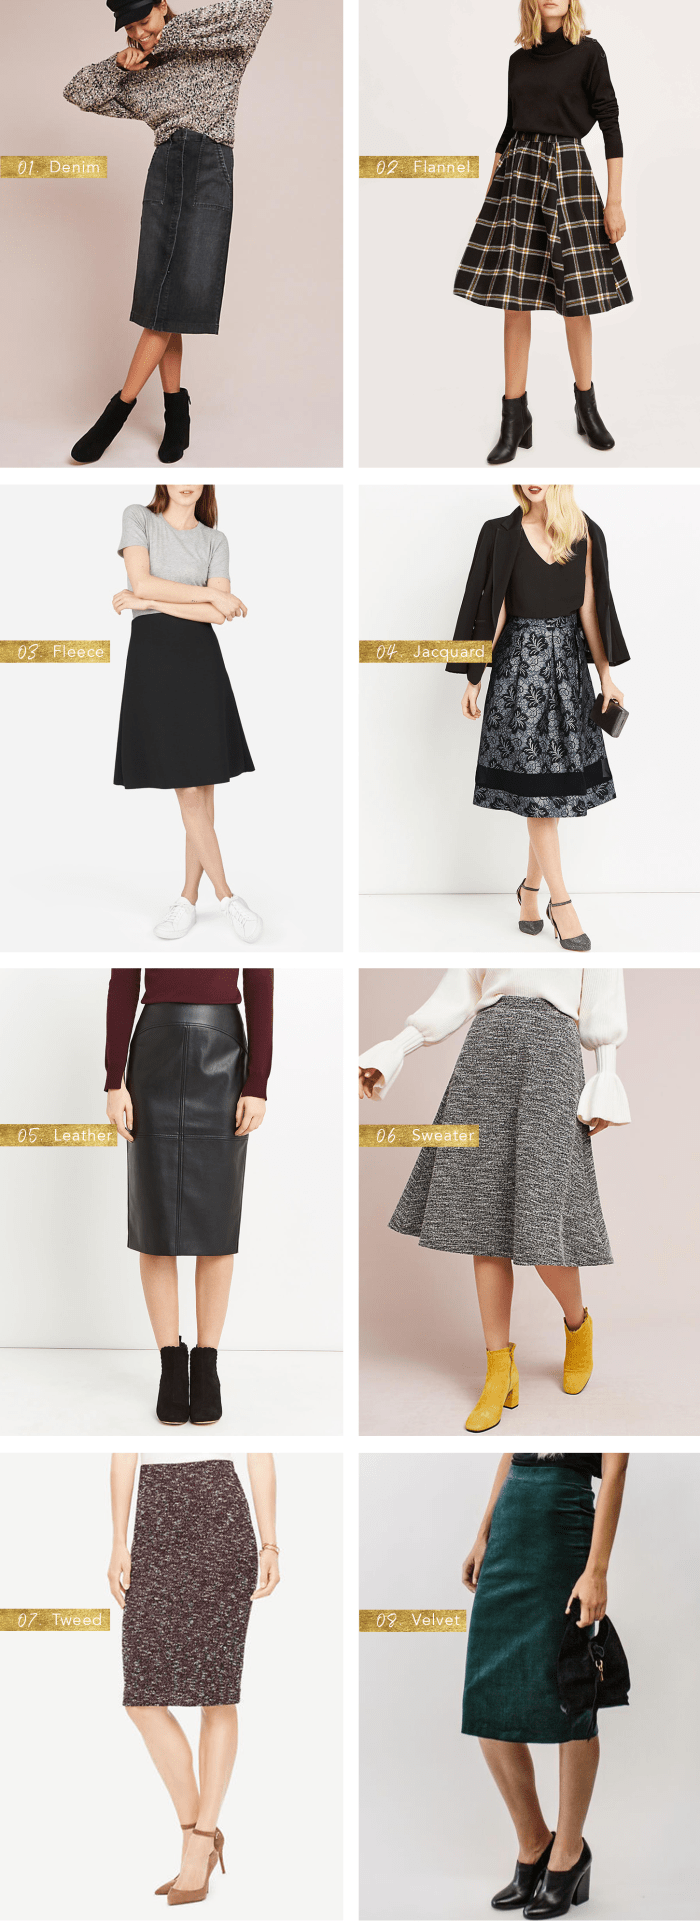 Heavy-Duty Skirts That Will Keep Your Legs Warm All Winter Long - Verily